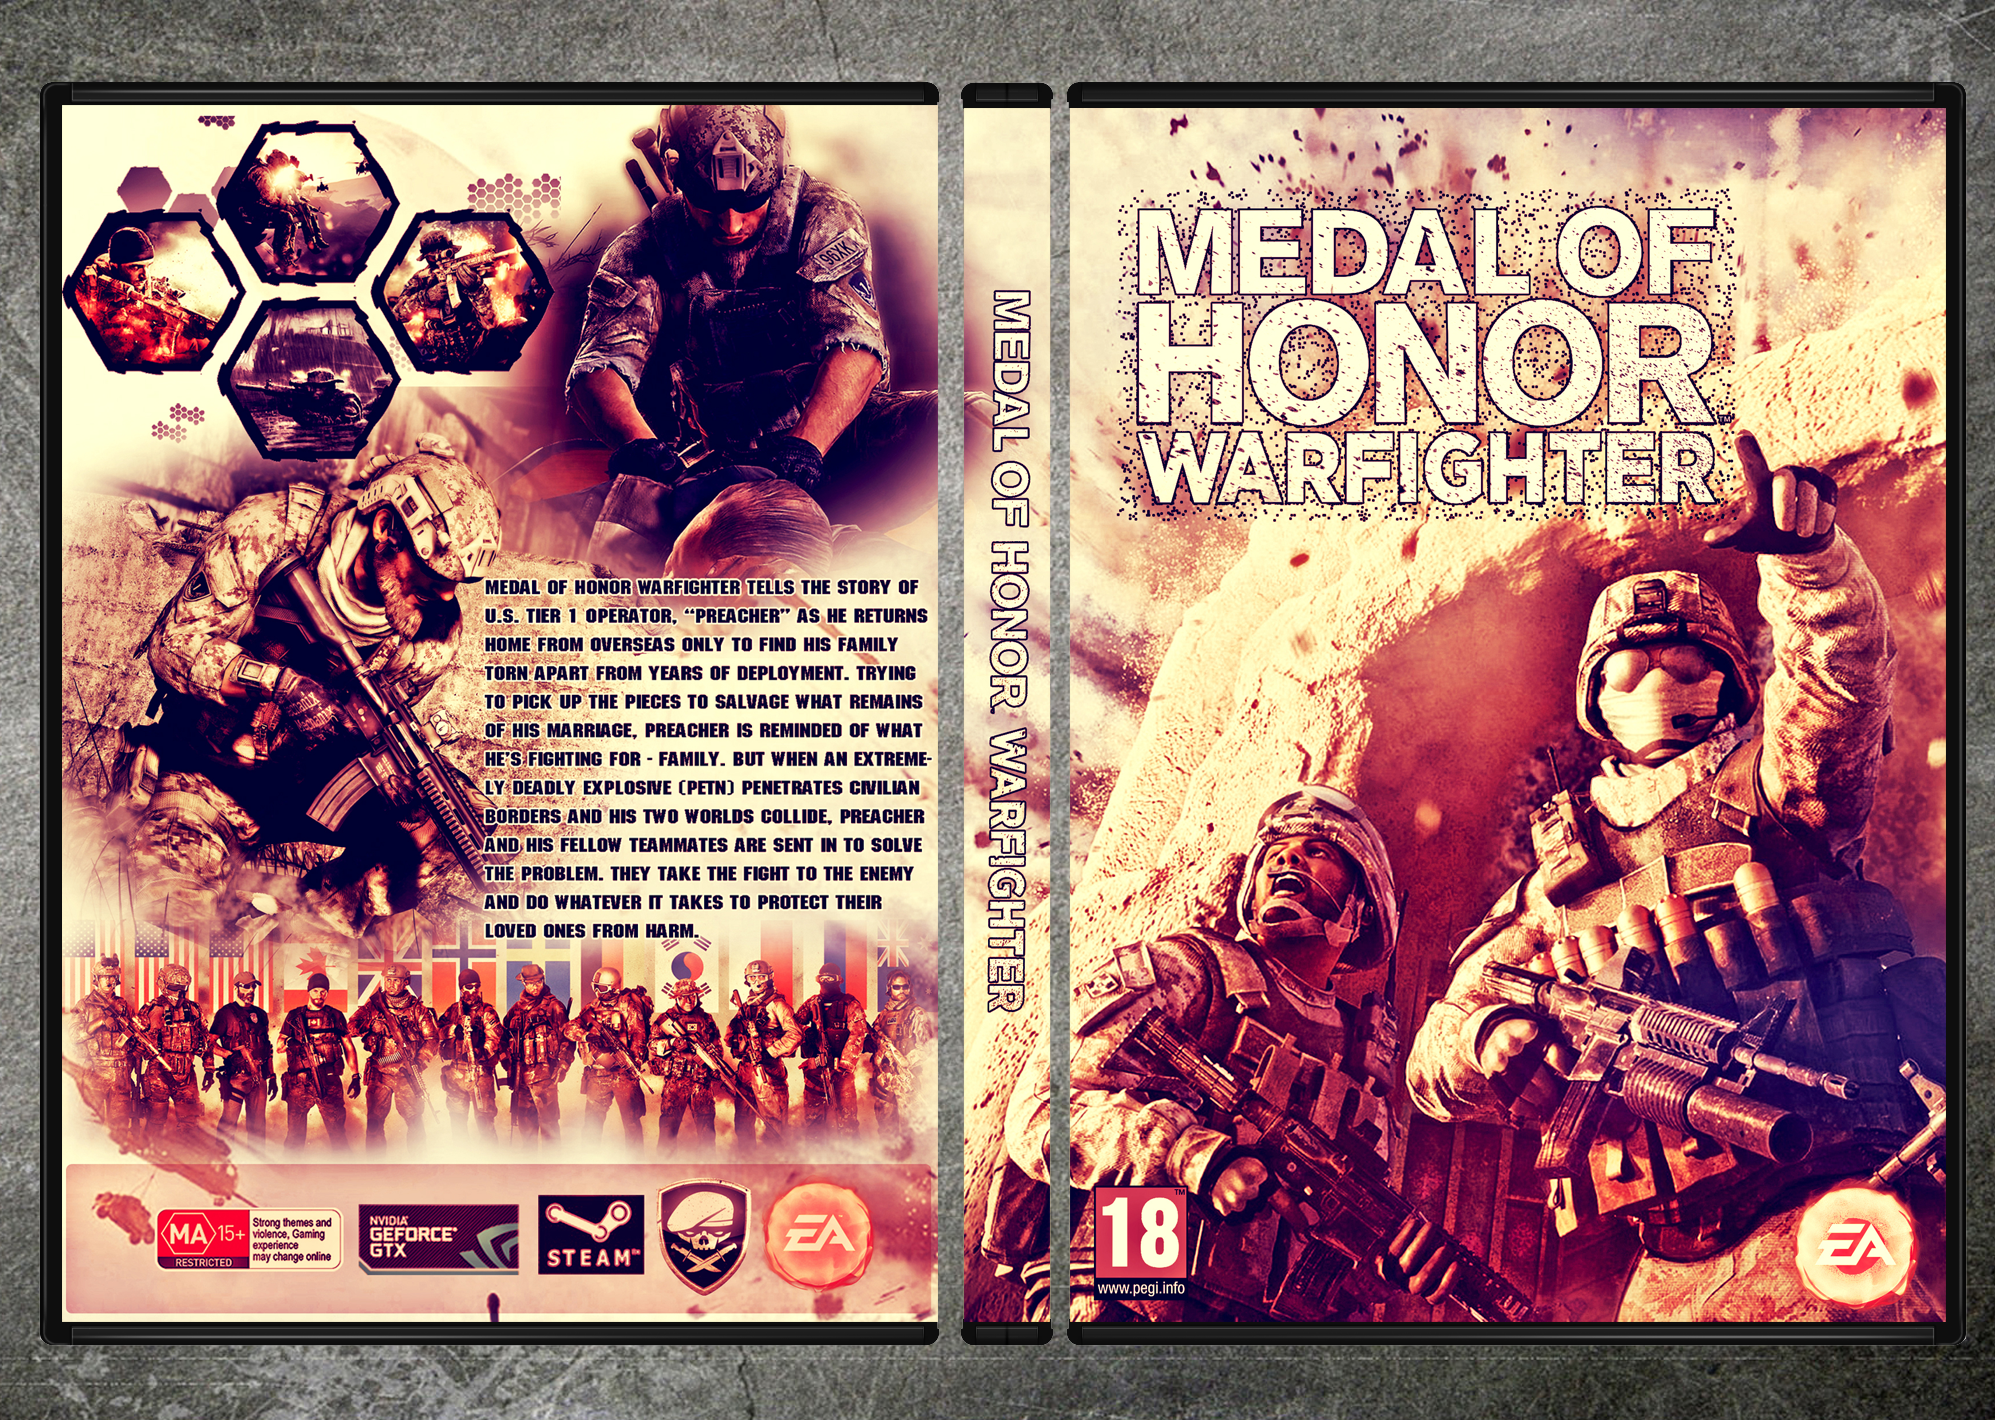 Medal of Honor Warfighter box cover